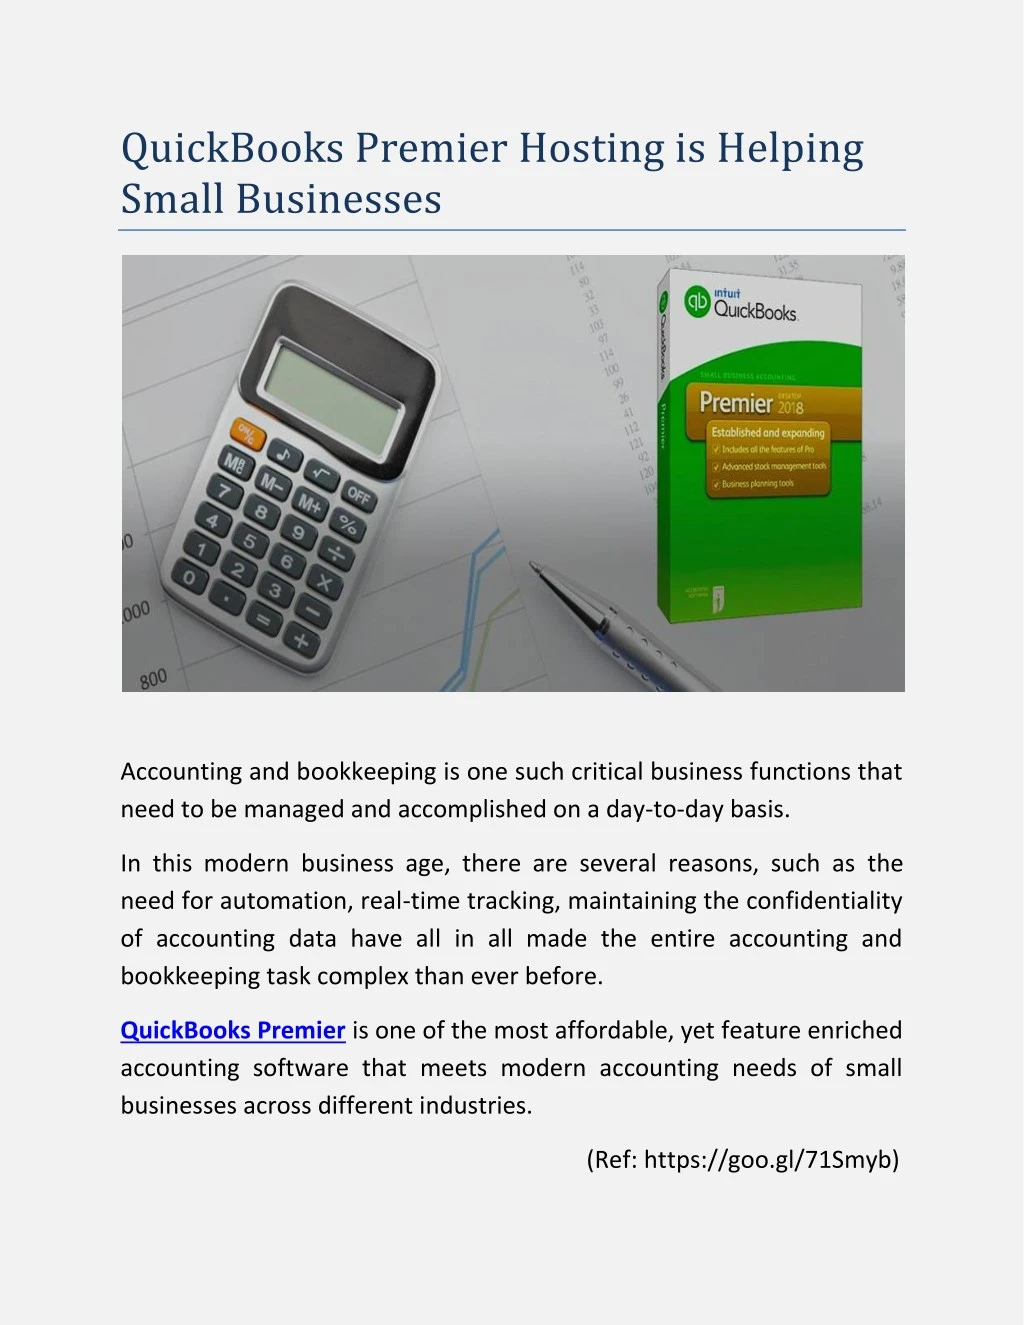 quickbooks premier hosting is helping small